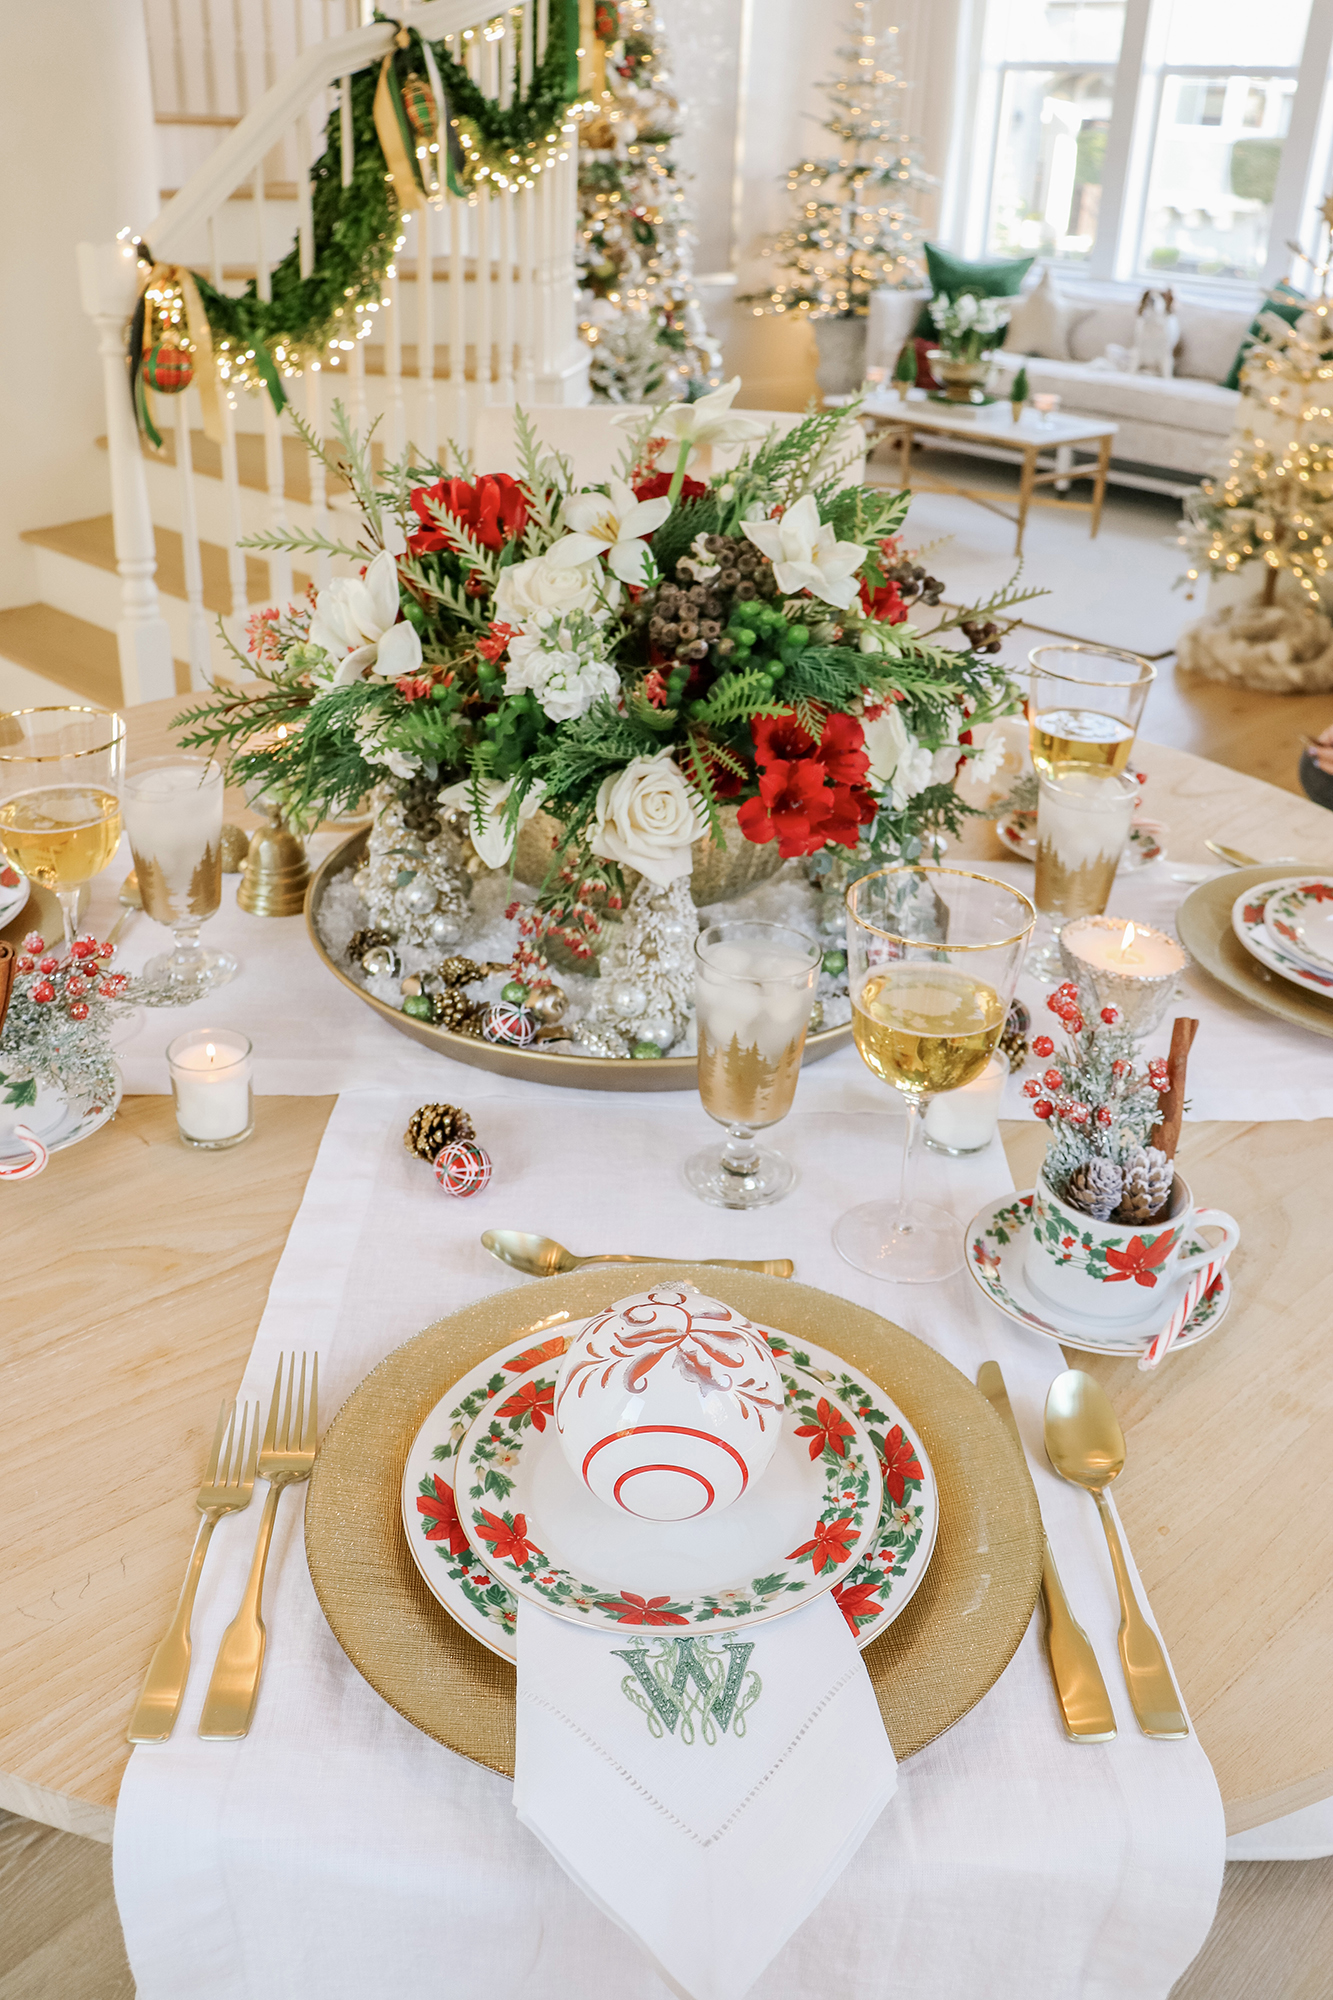 My 2020 Winter Tablescape with Vintage-Style Decor - Lovely decor pieces and affordable options at all price points, vintage christmas decor ideas